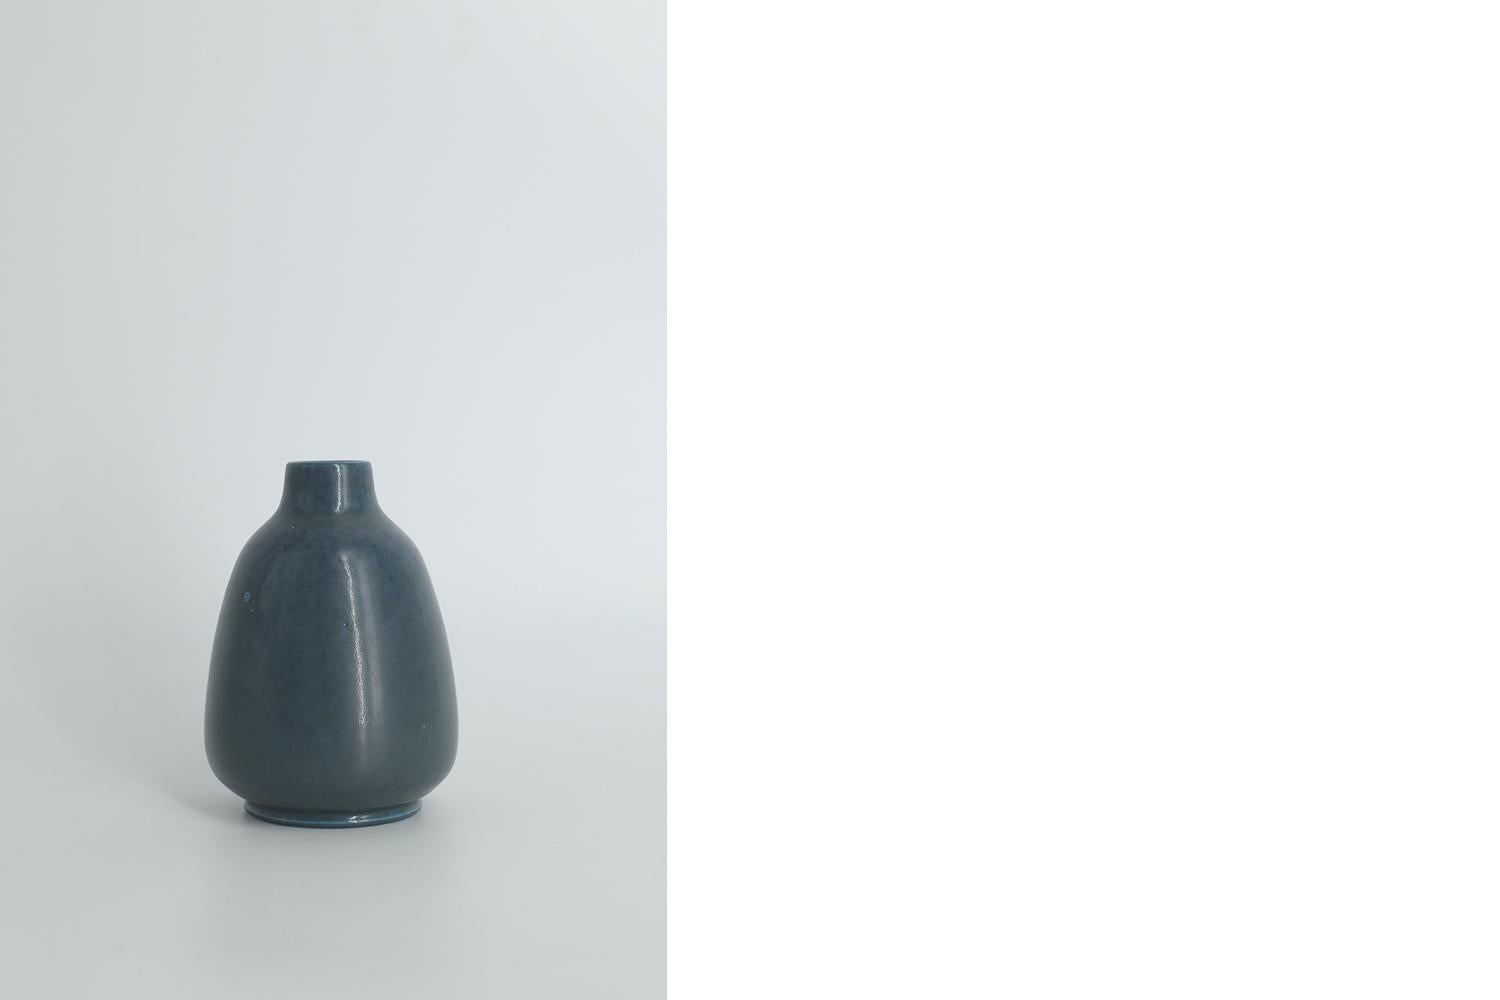 This miniature, collectible stoneware vase was designed by Gunnar Borg for the Swedish manufacture Höganäs Keramik during the 1960s. Handmade by a Master, with the utmost care and attention to details. This vase dyed a deep sea color in an irregular